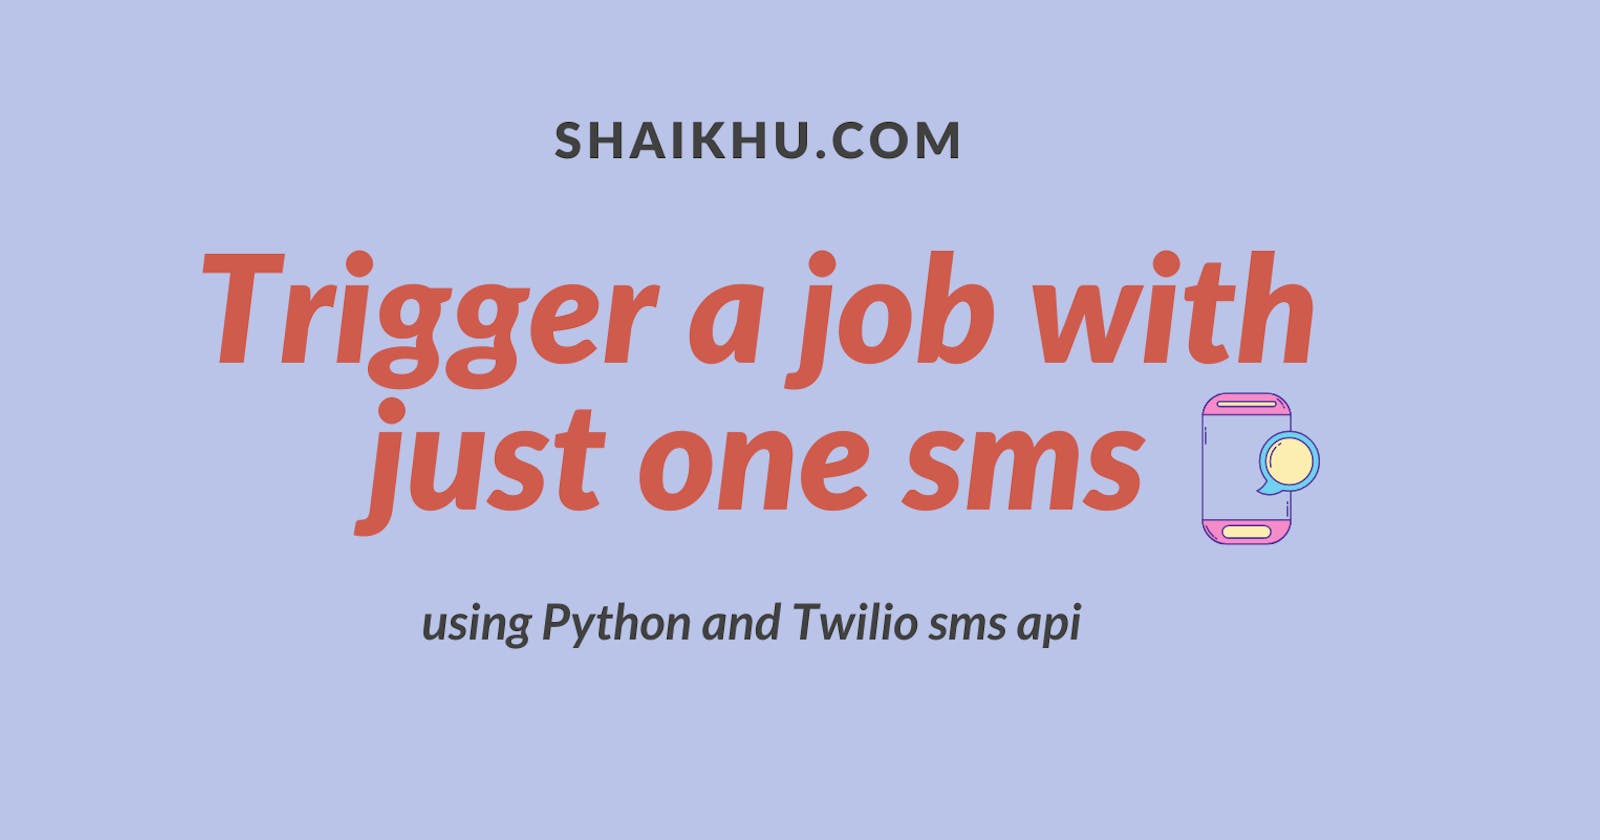 How to trigger a job or program from anywhere with a SMS